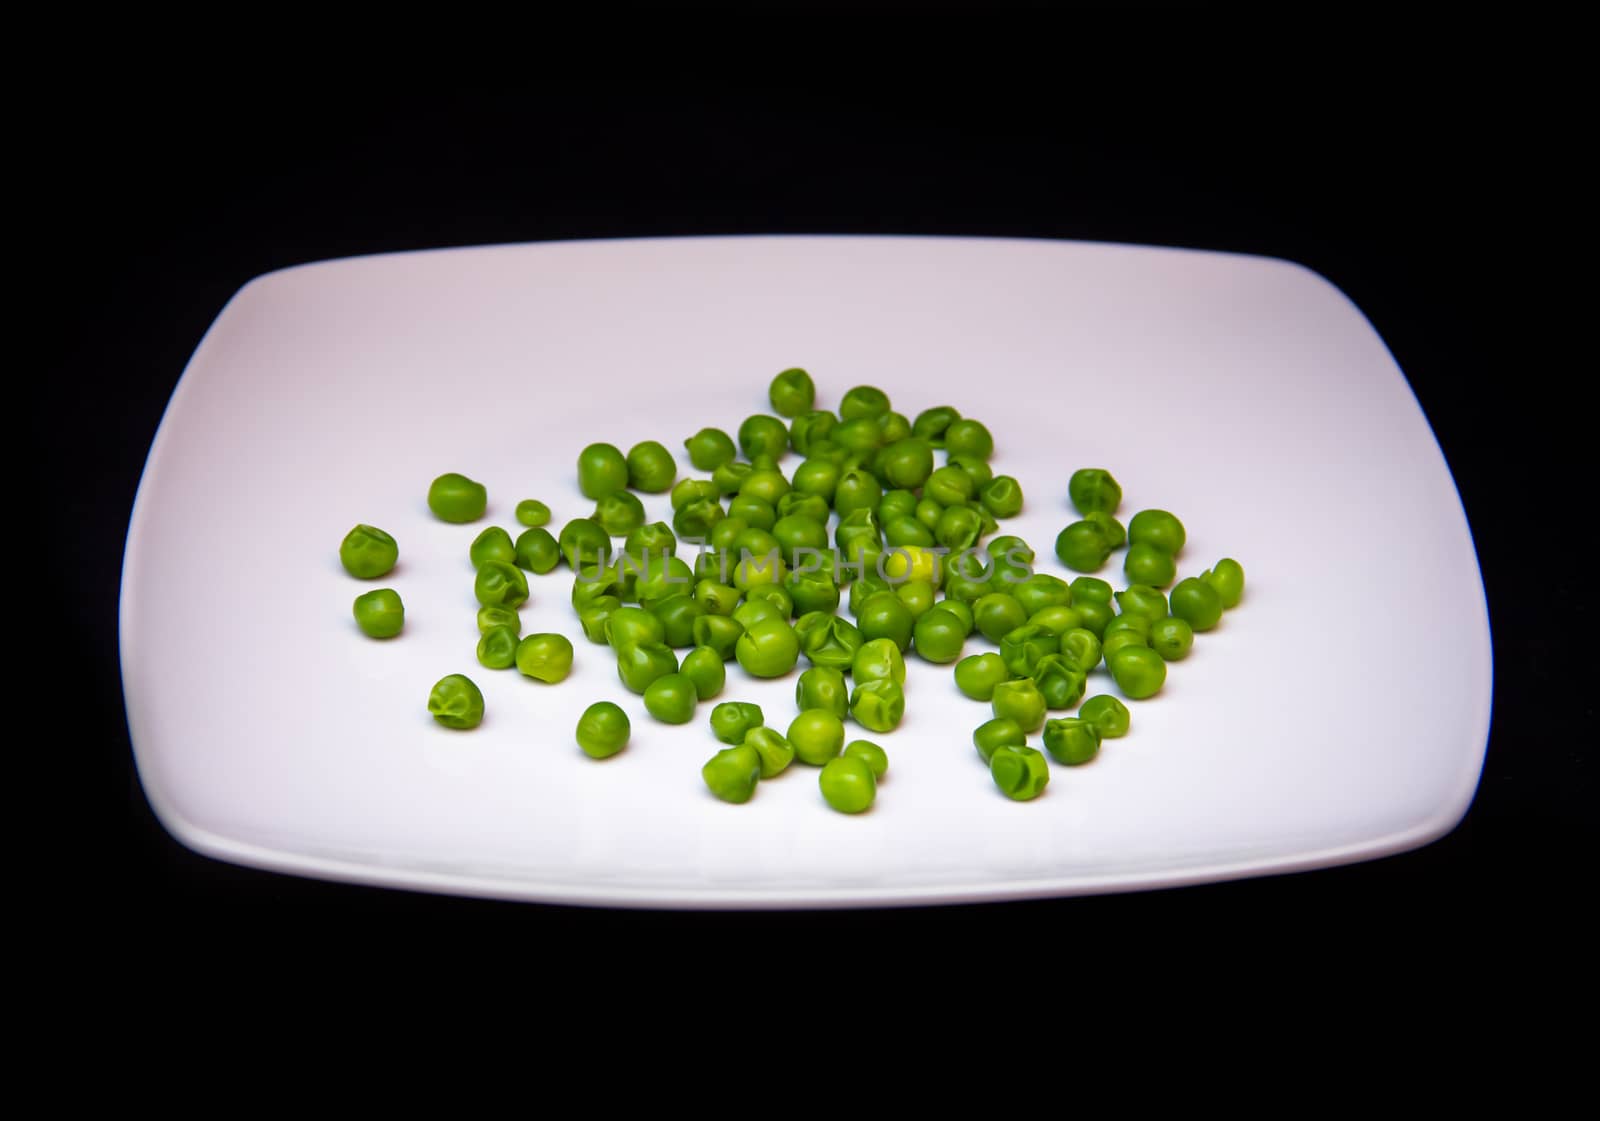 On black dish with peas by spafra